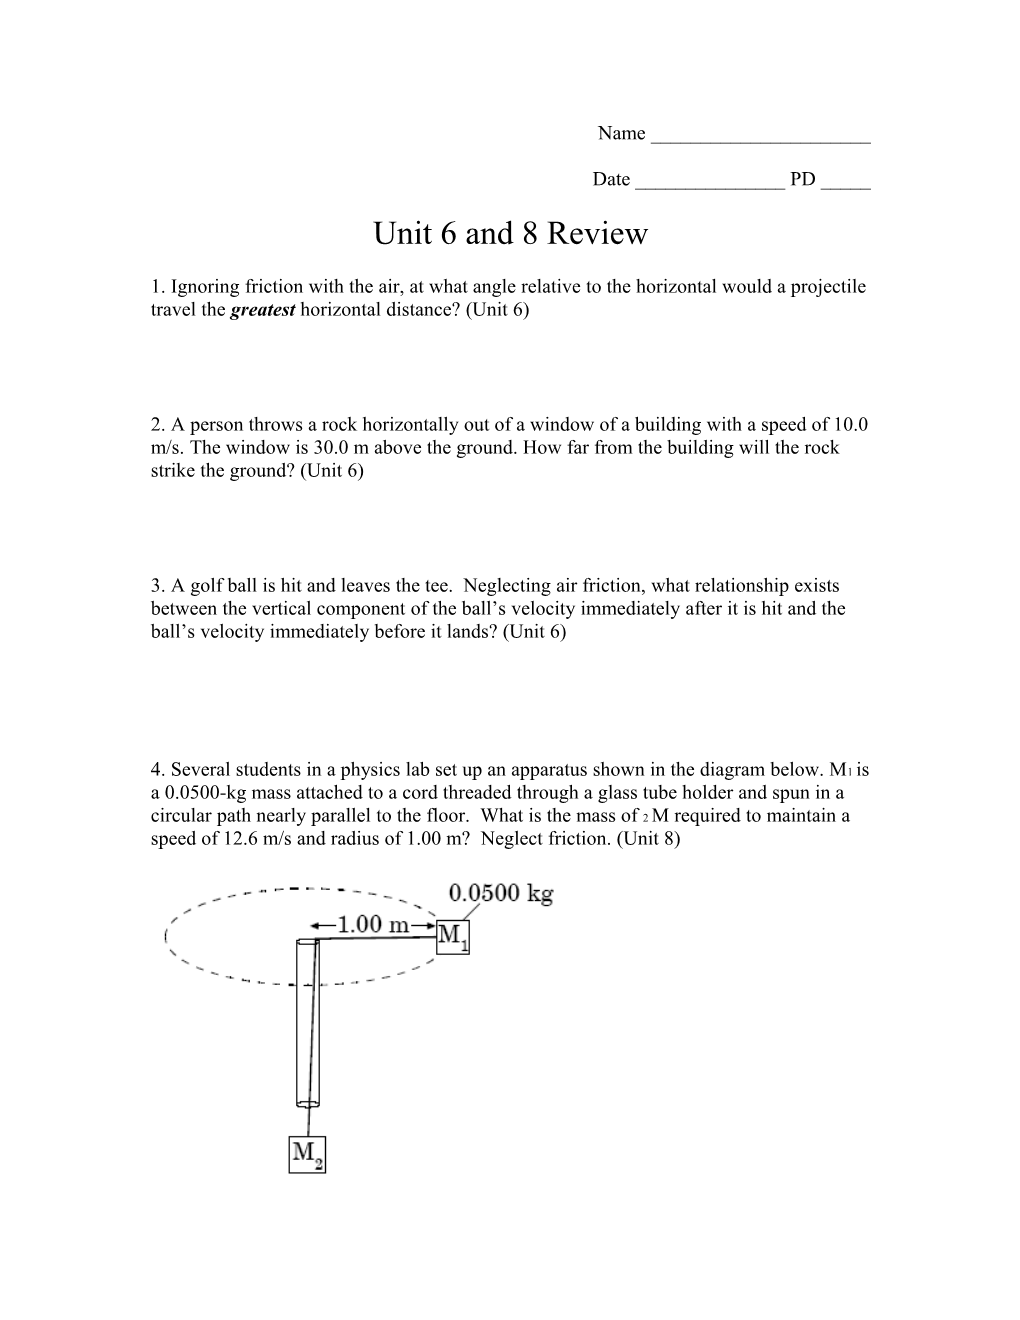 Unit 6 and 8 Review